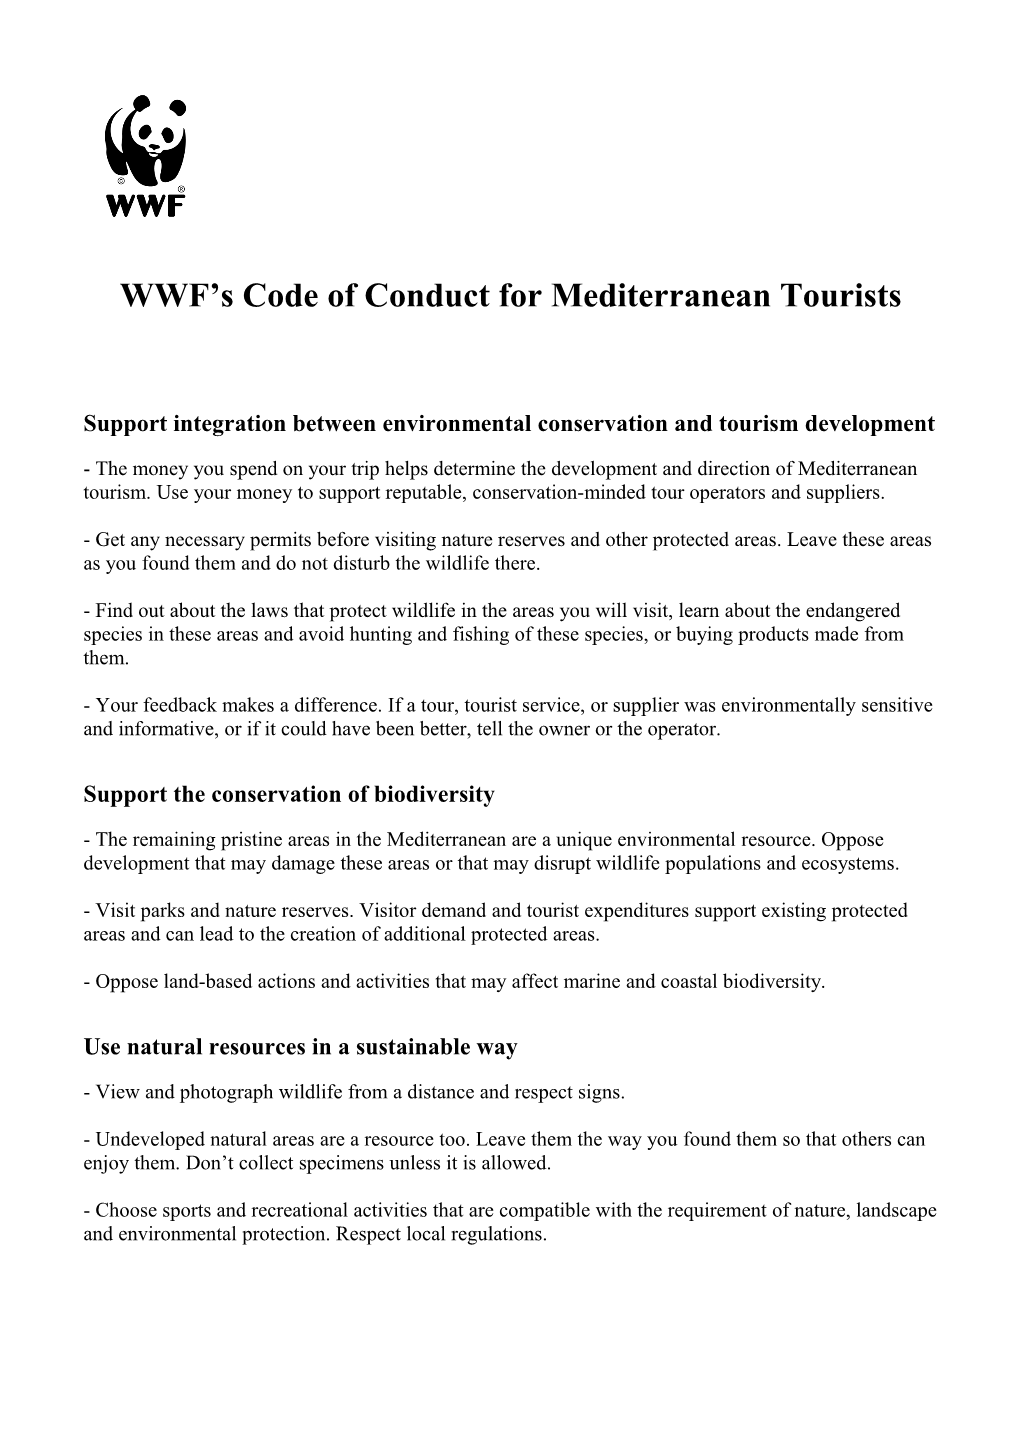 WWF S Code of Conduct for Mediterranean Tourists